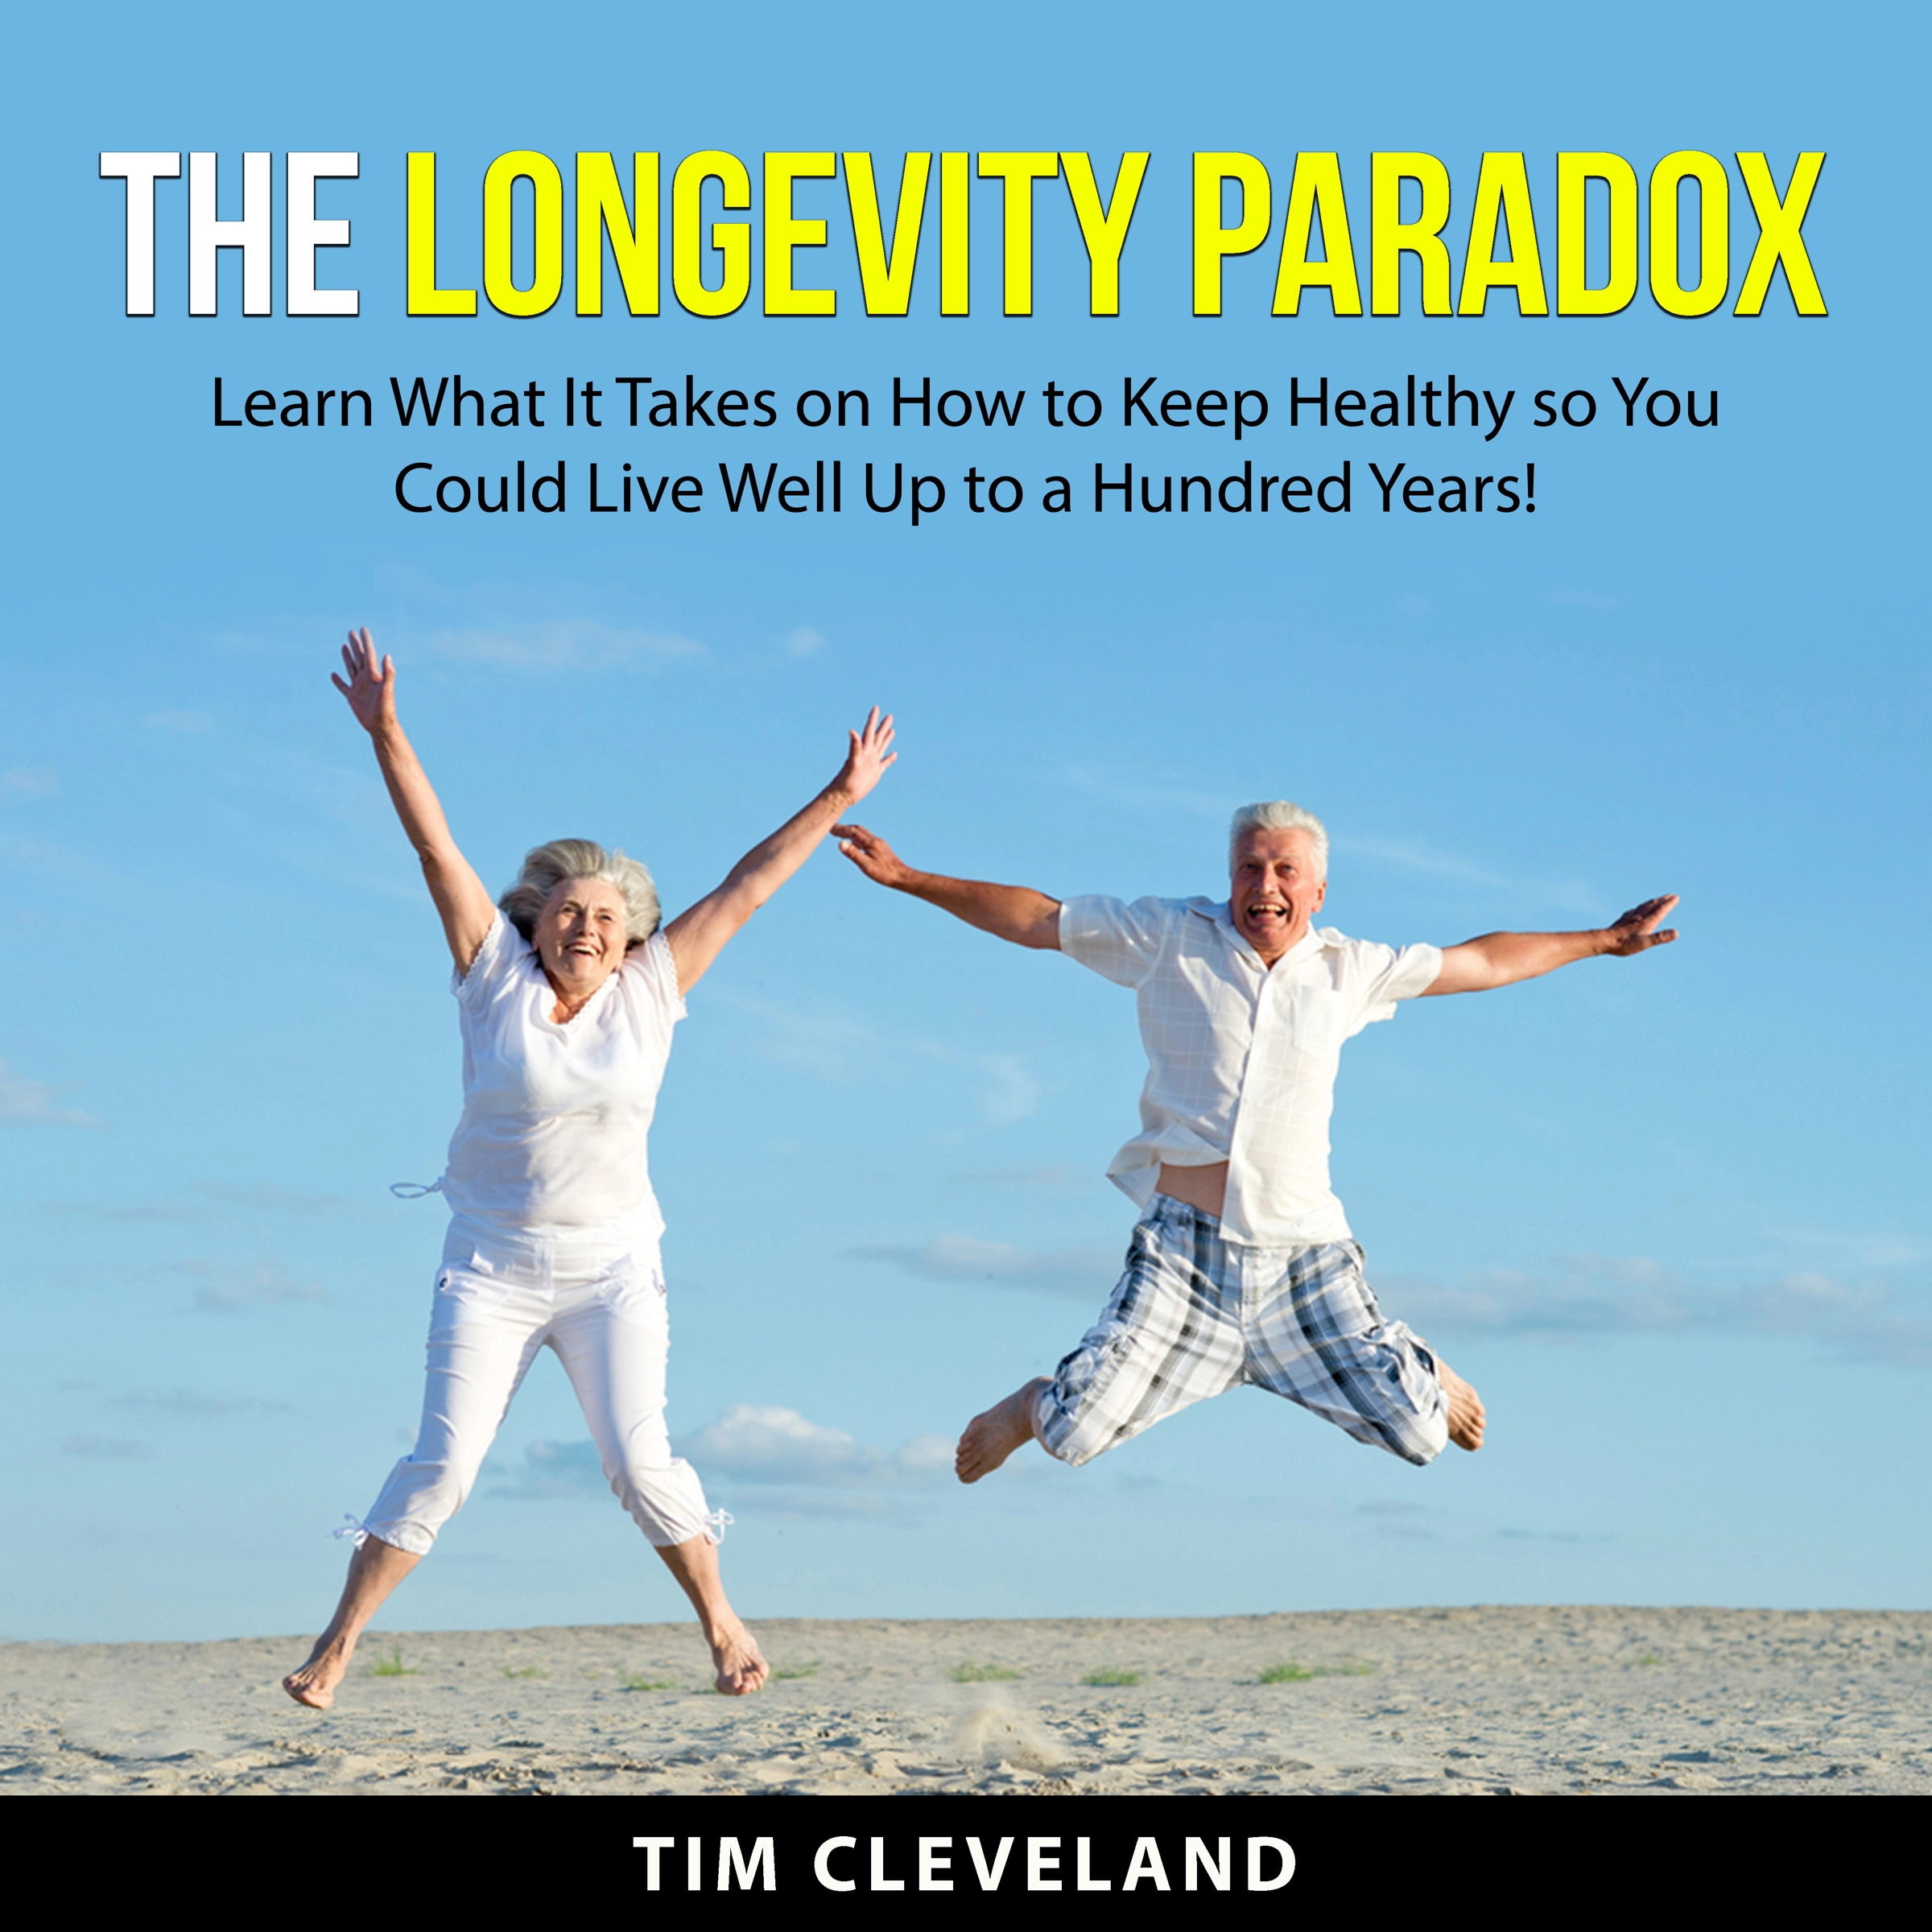 The Longevity Paradox Audiobook by Tim Cleveland